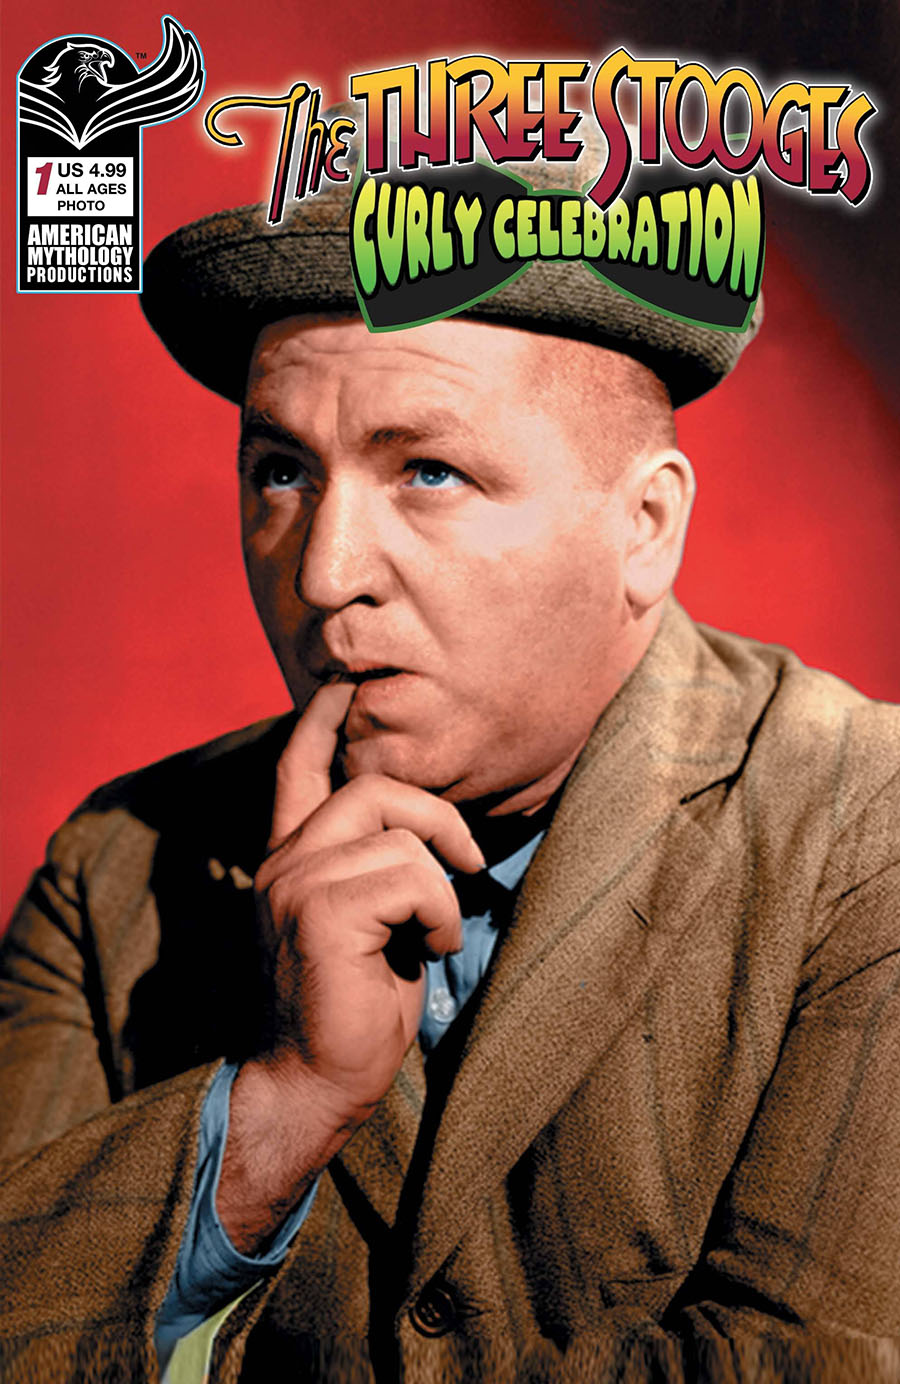 Three Stooges Curly Celebration #1 (One Shot) Cover B Variant Color Photo Cover